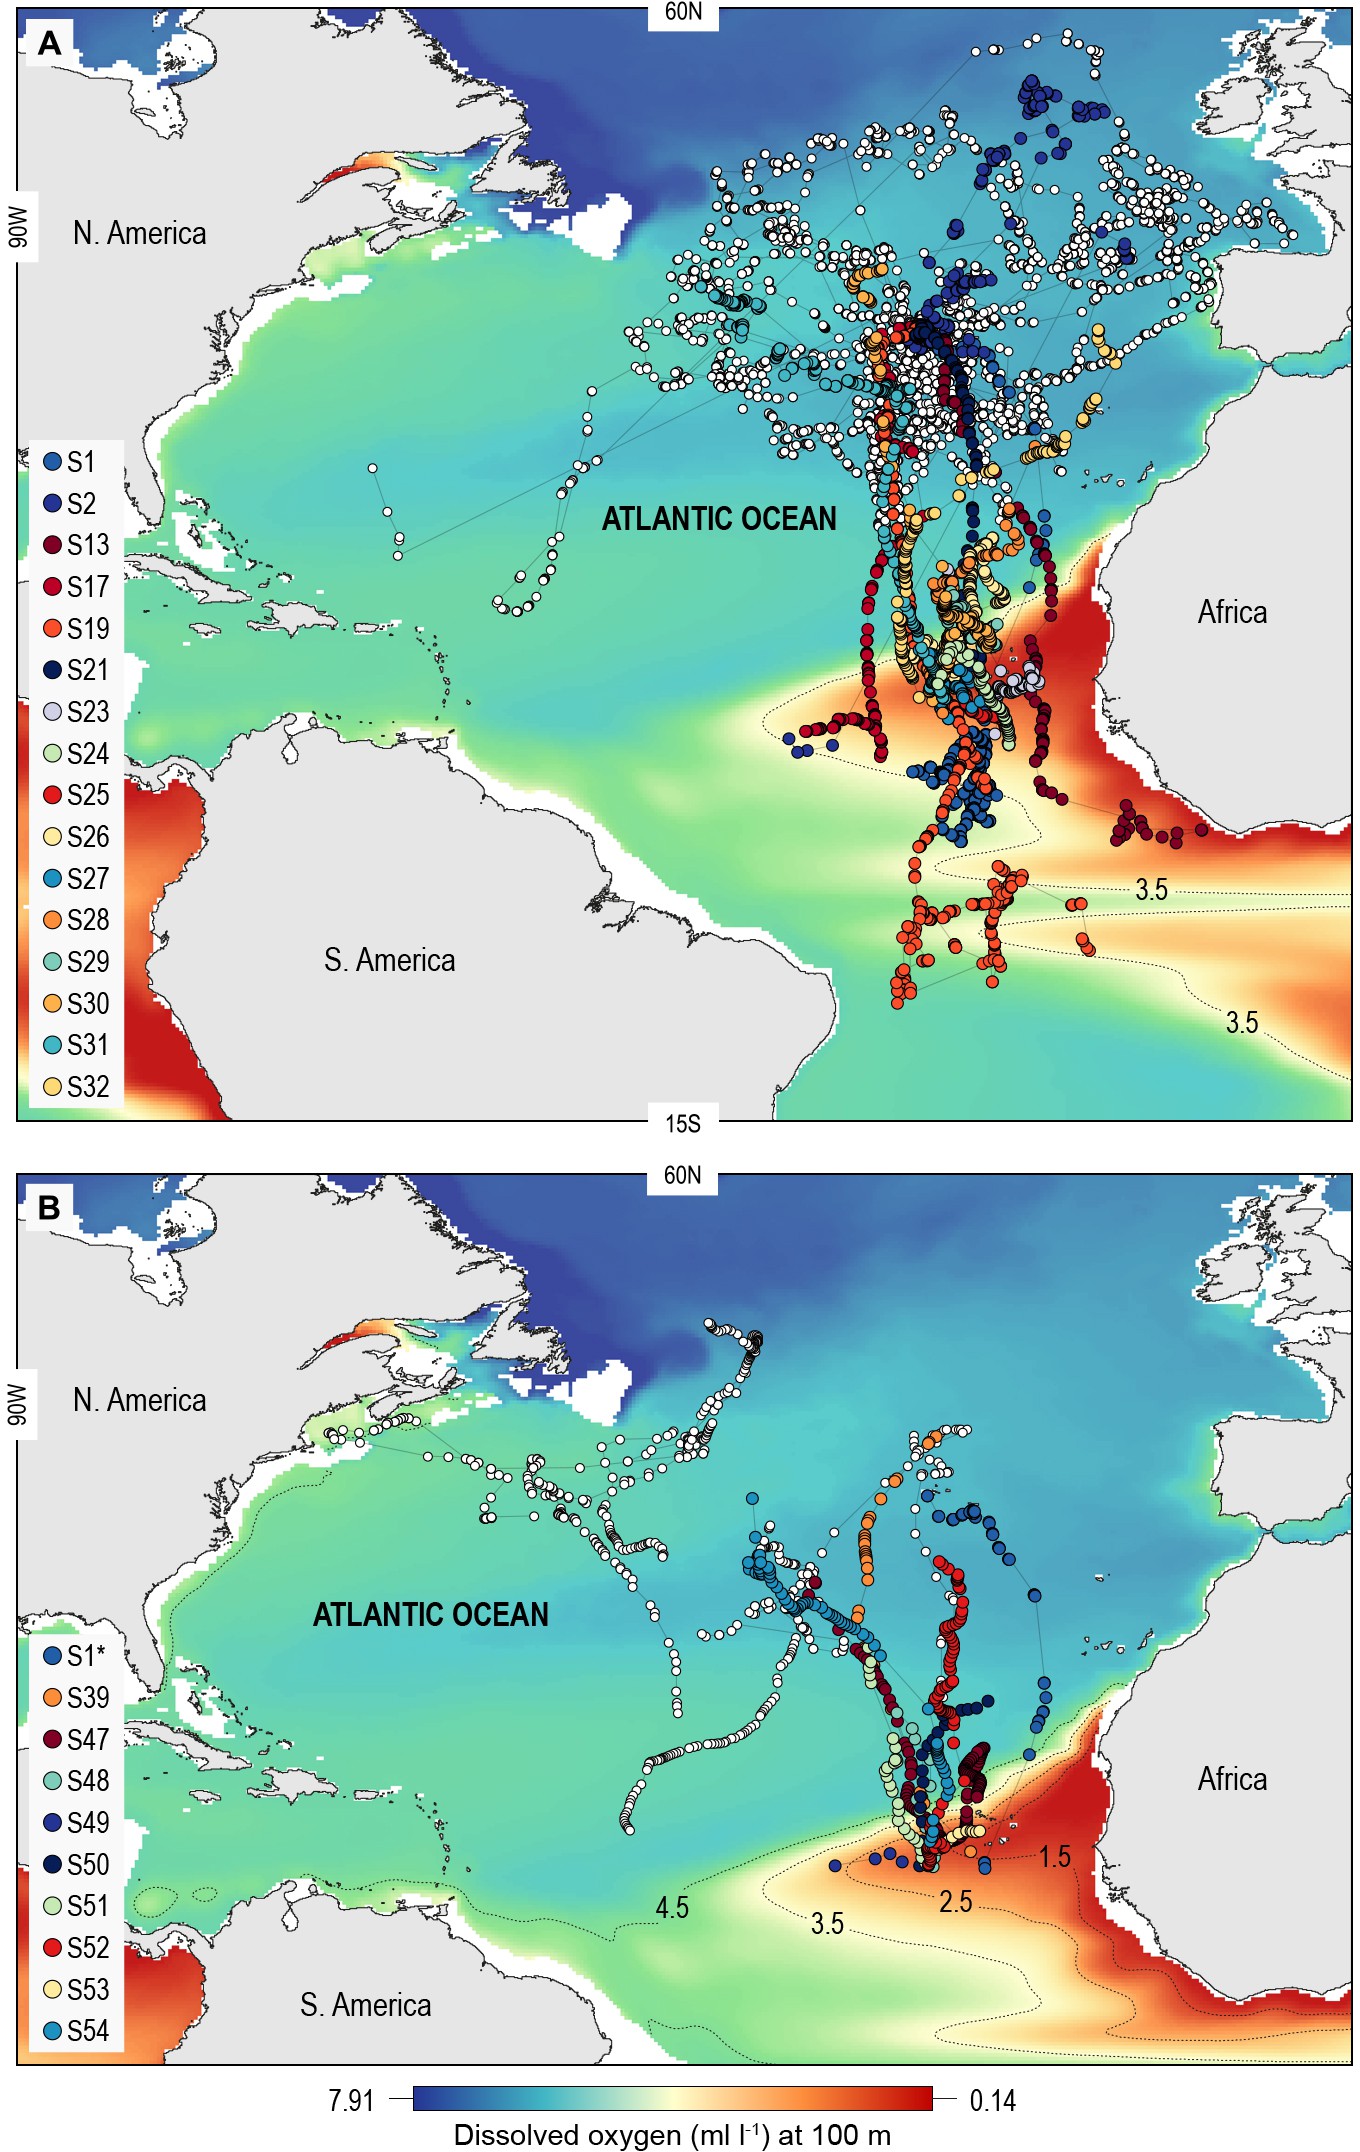 Movements of blue sharks in relation to the eastern tropical Atlantic oxygen minimum zone